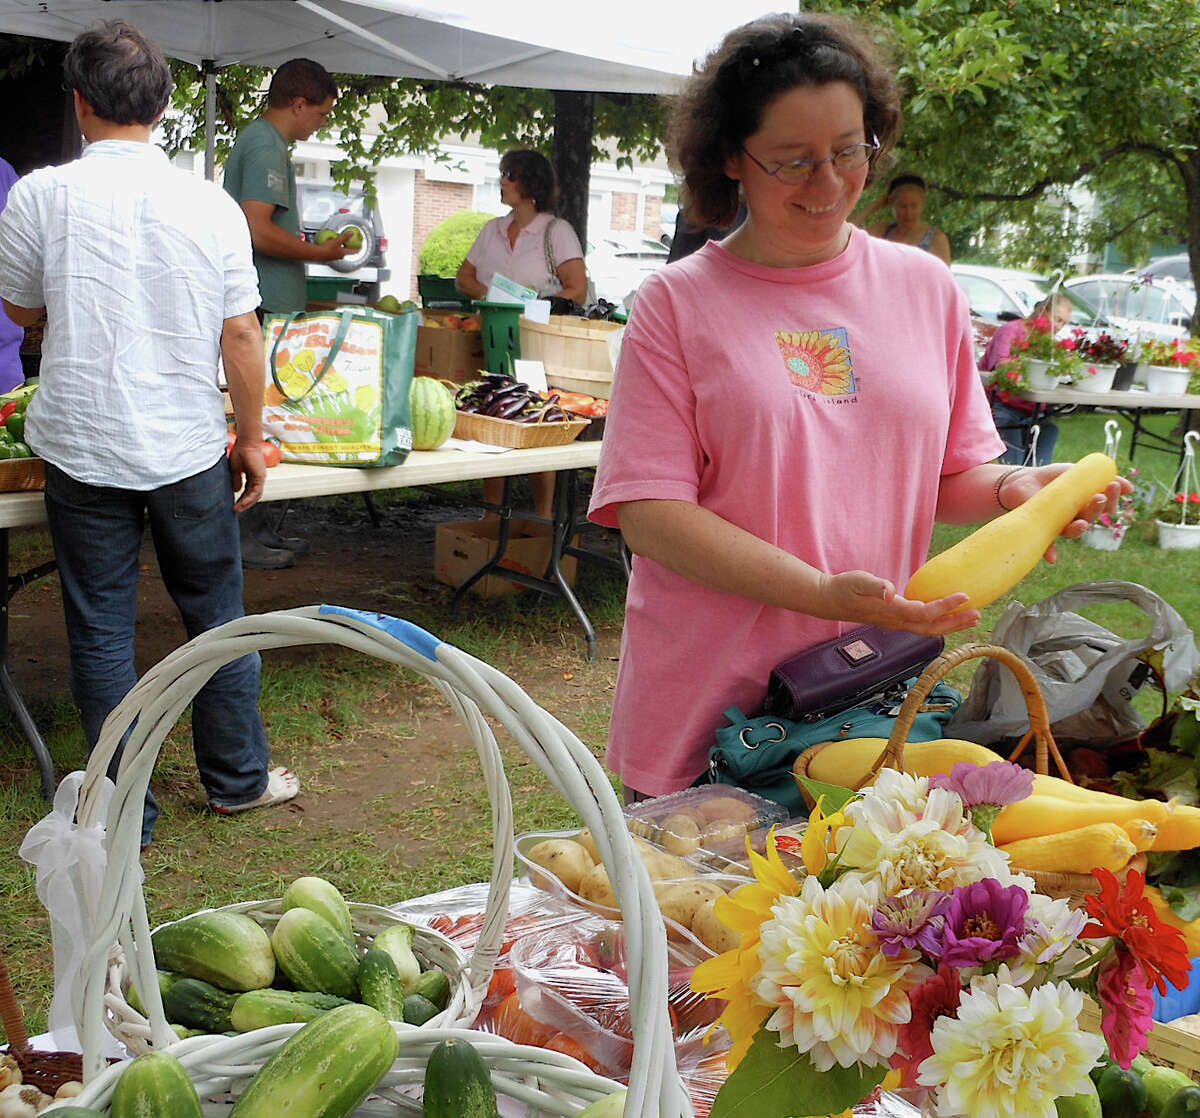 Greenfield farm market puts the 'green' in summer harvest